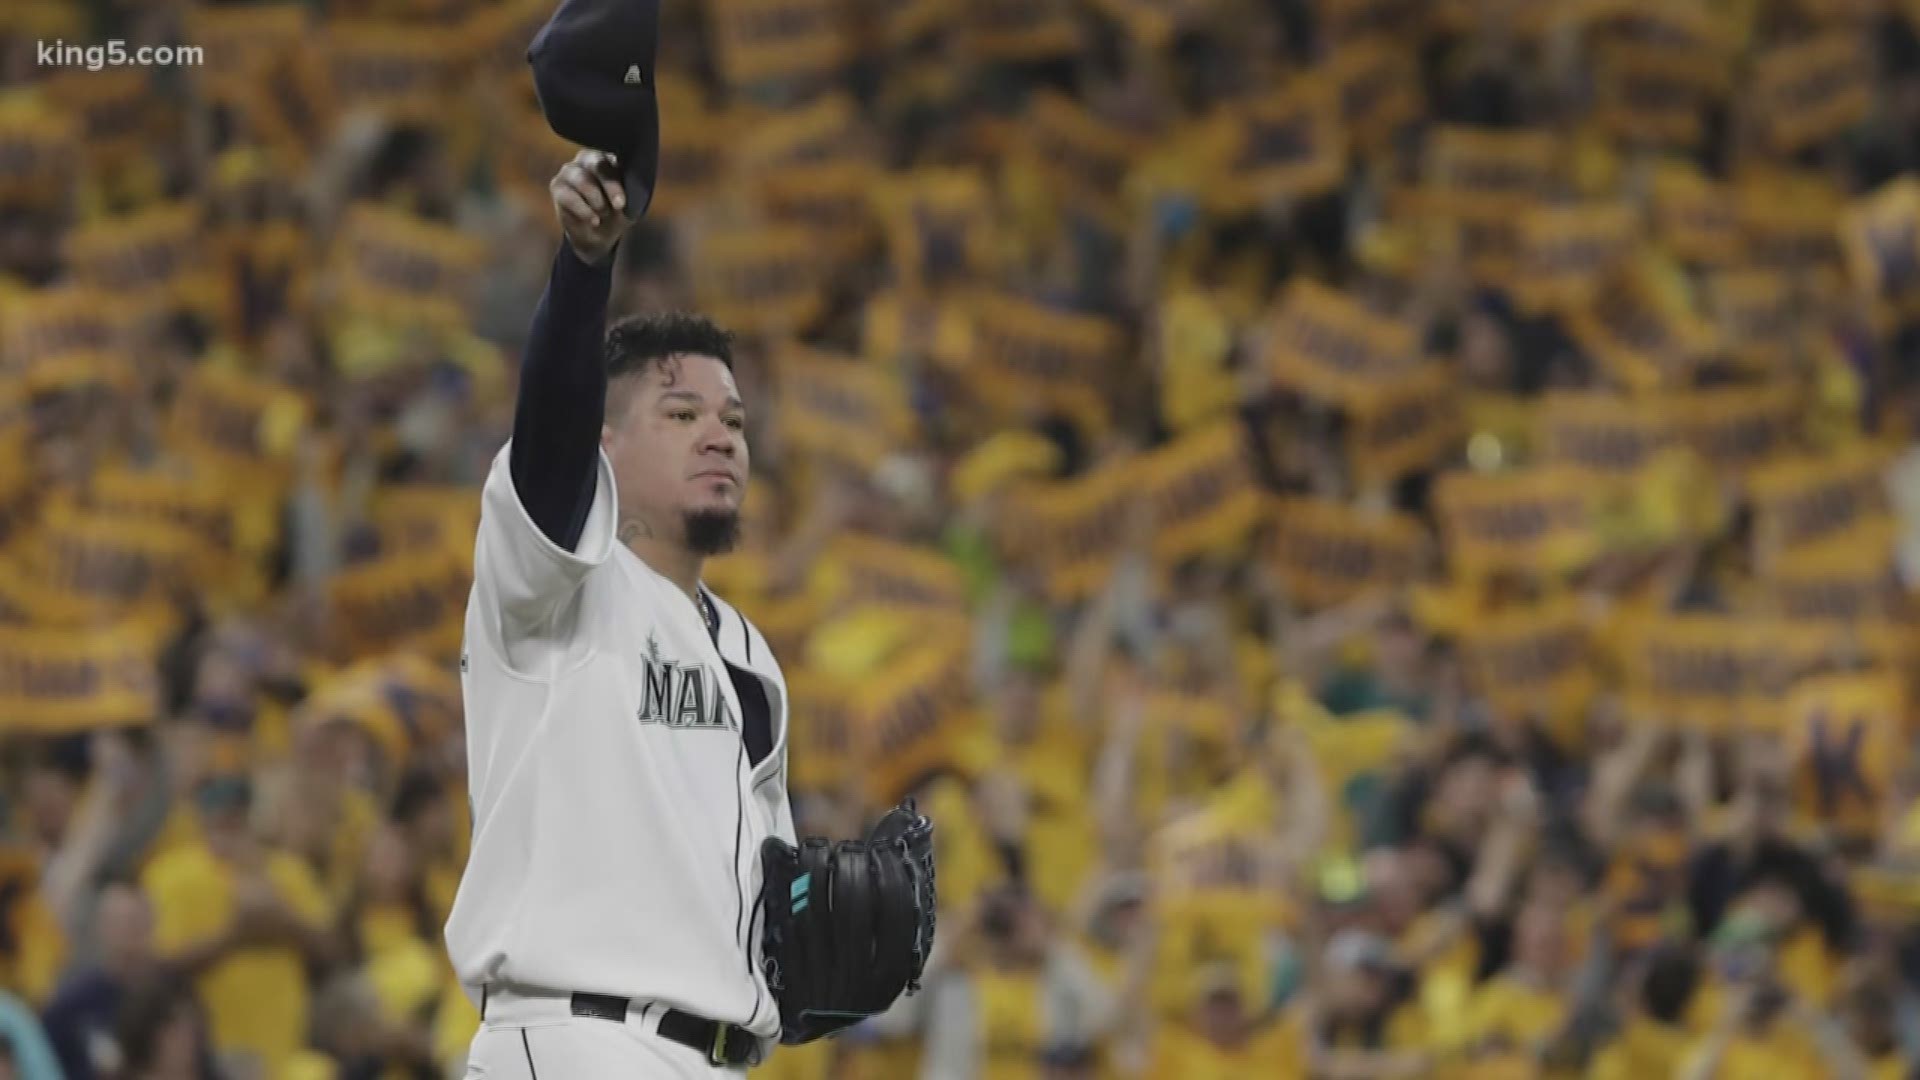 Fans say farewell to King Felix during what was likely his final game as a  Seattle Mariner